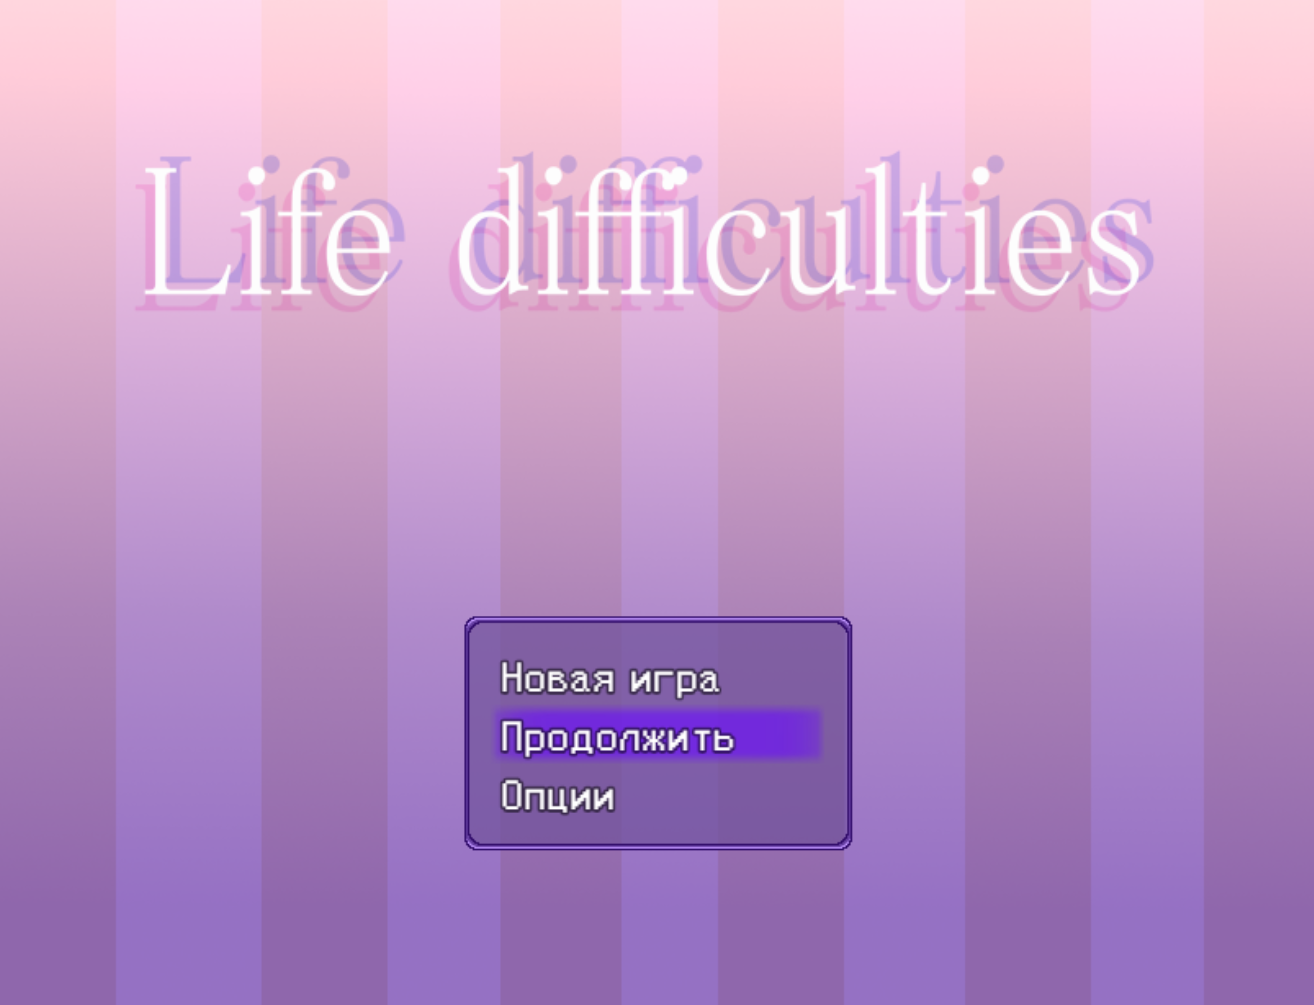 Life difficulties